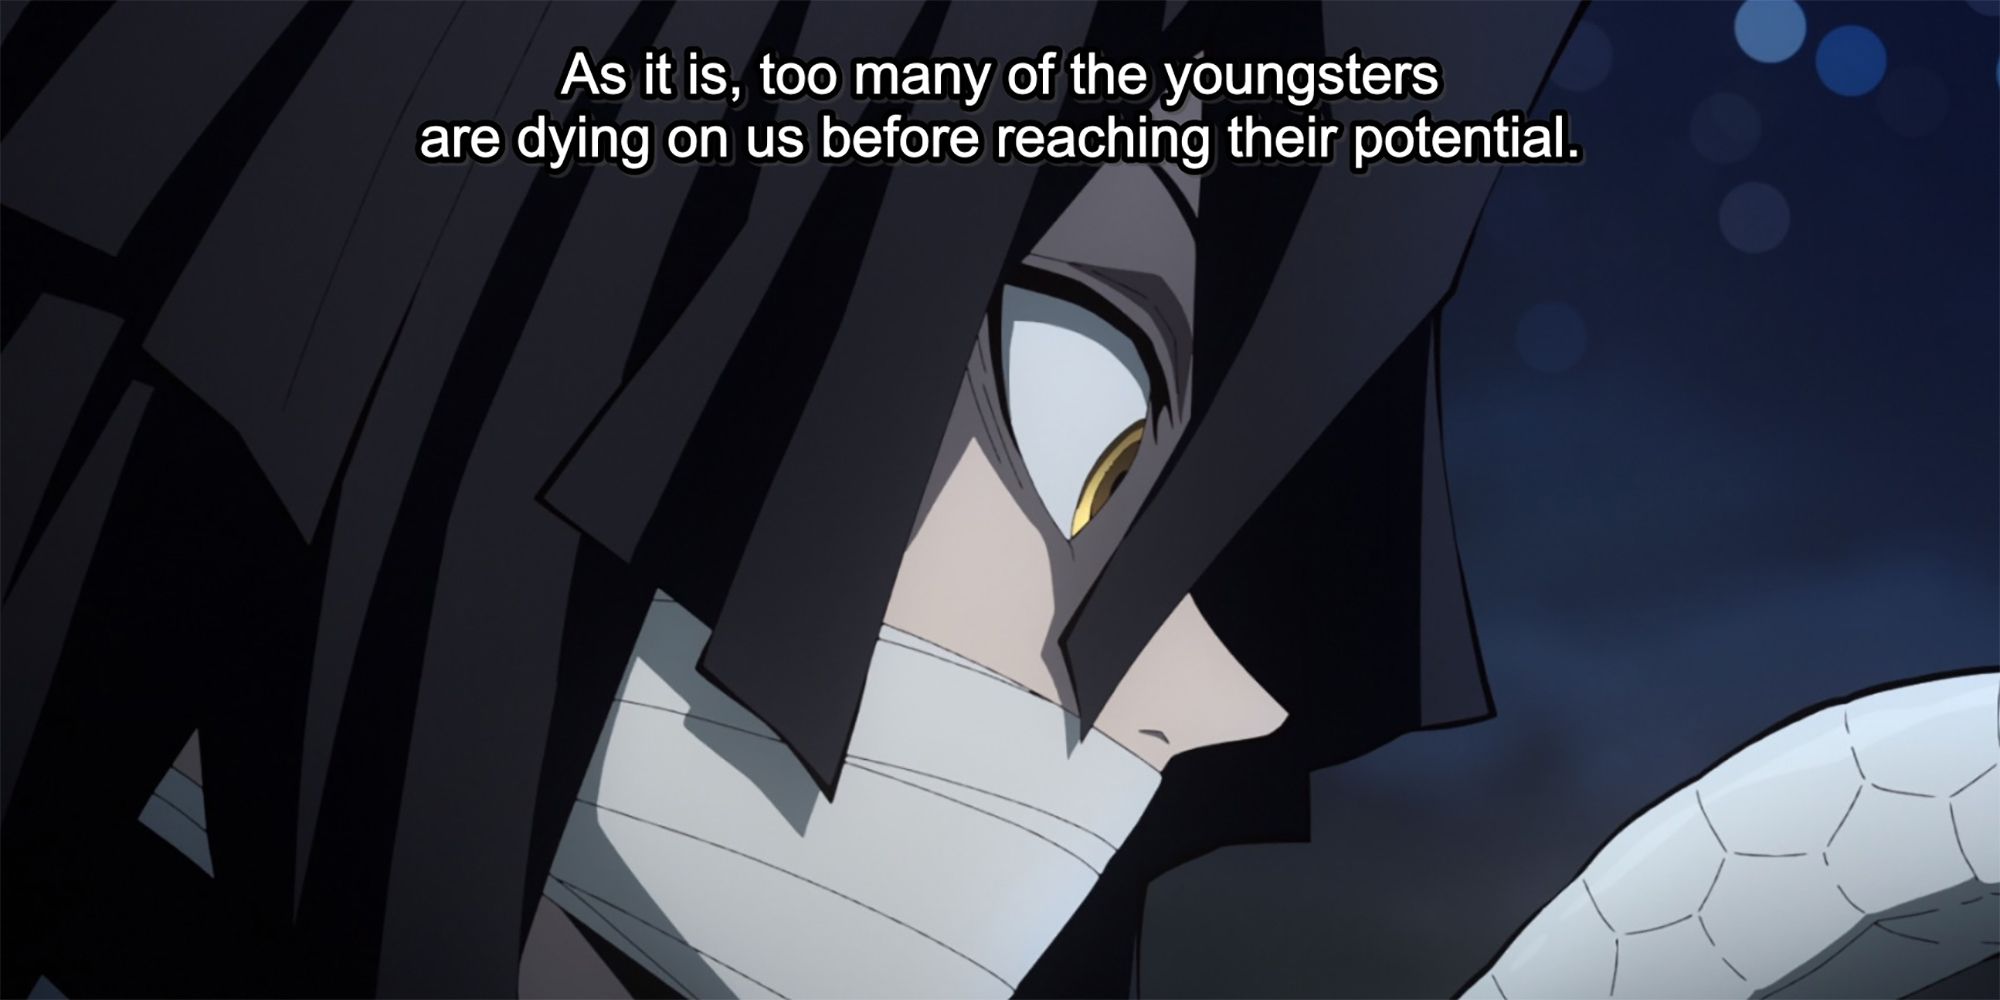 Demon Slayer - Obanai Talking About Recruits Dying Too Young